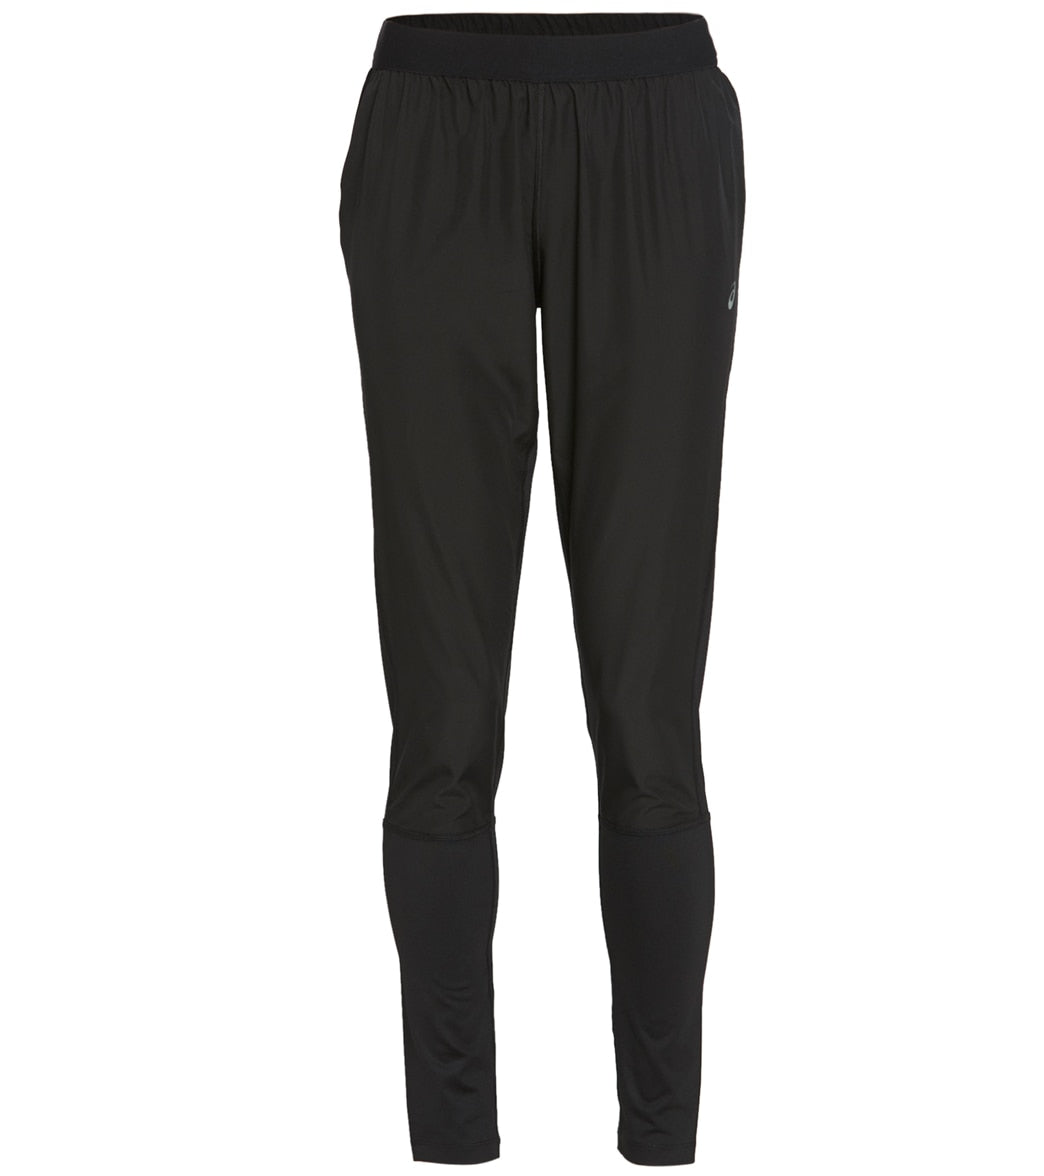 Asics Women's Race Pants - Performance Black Small Size Small Polyester - Swimoutlet.com